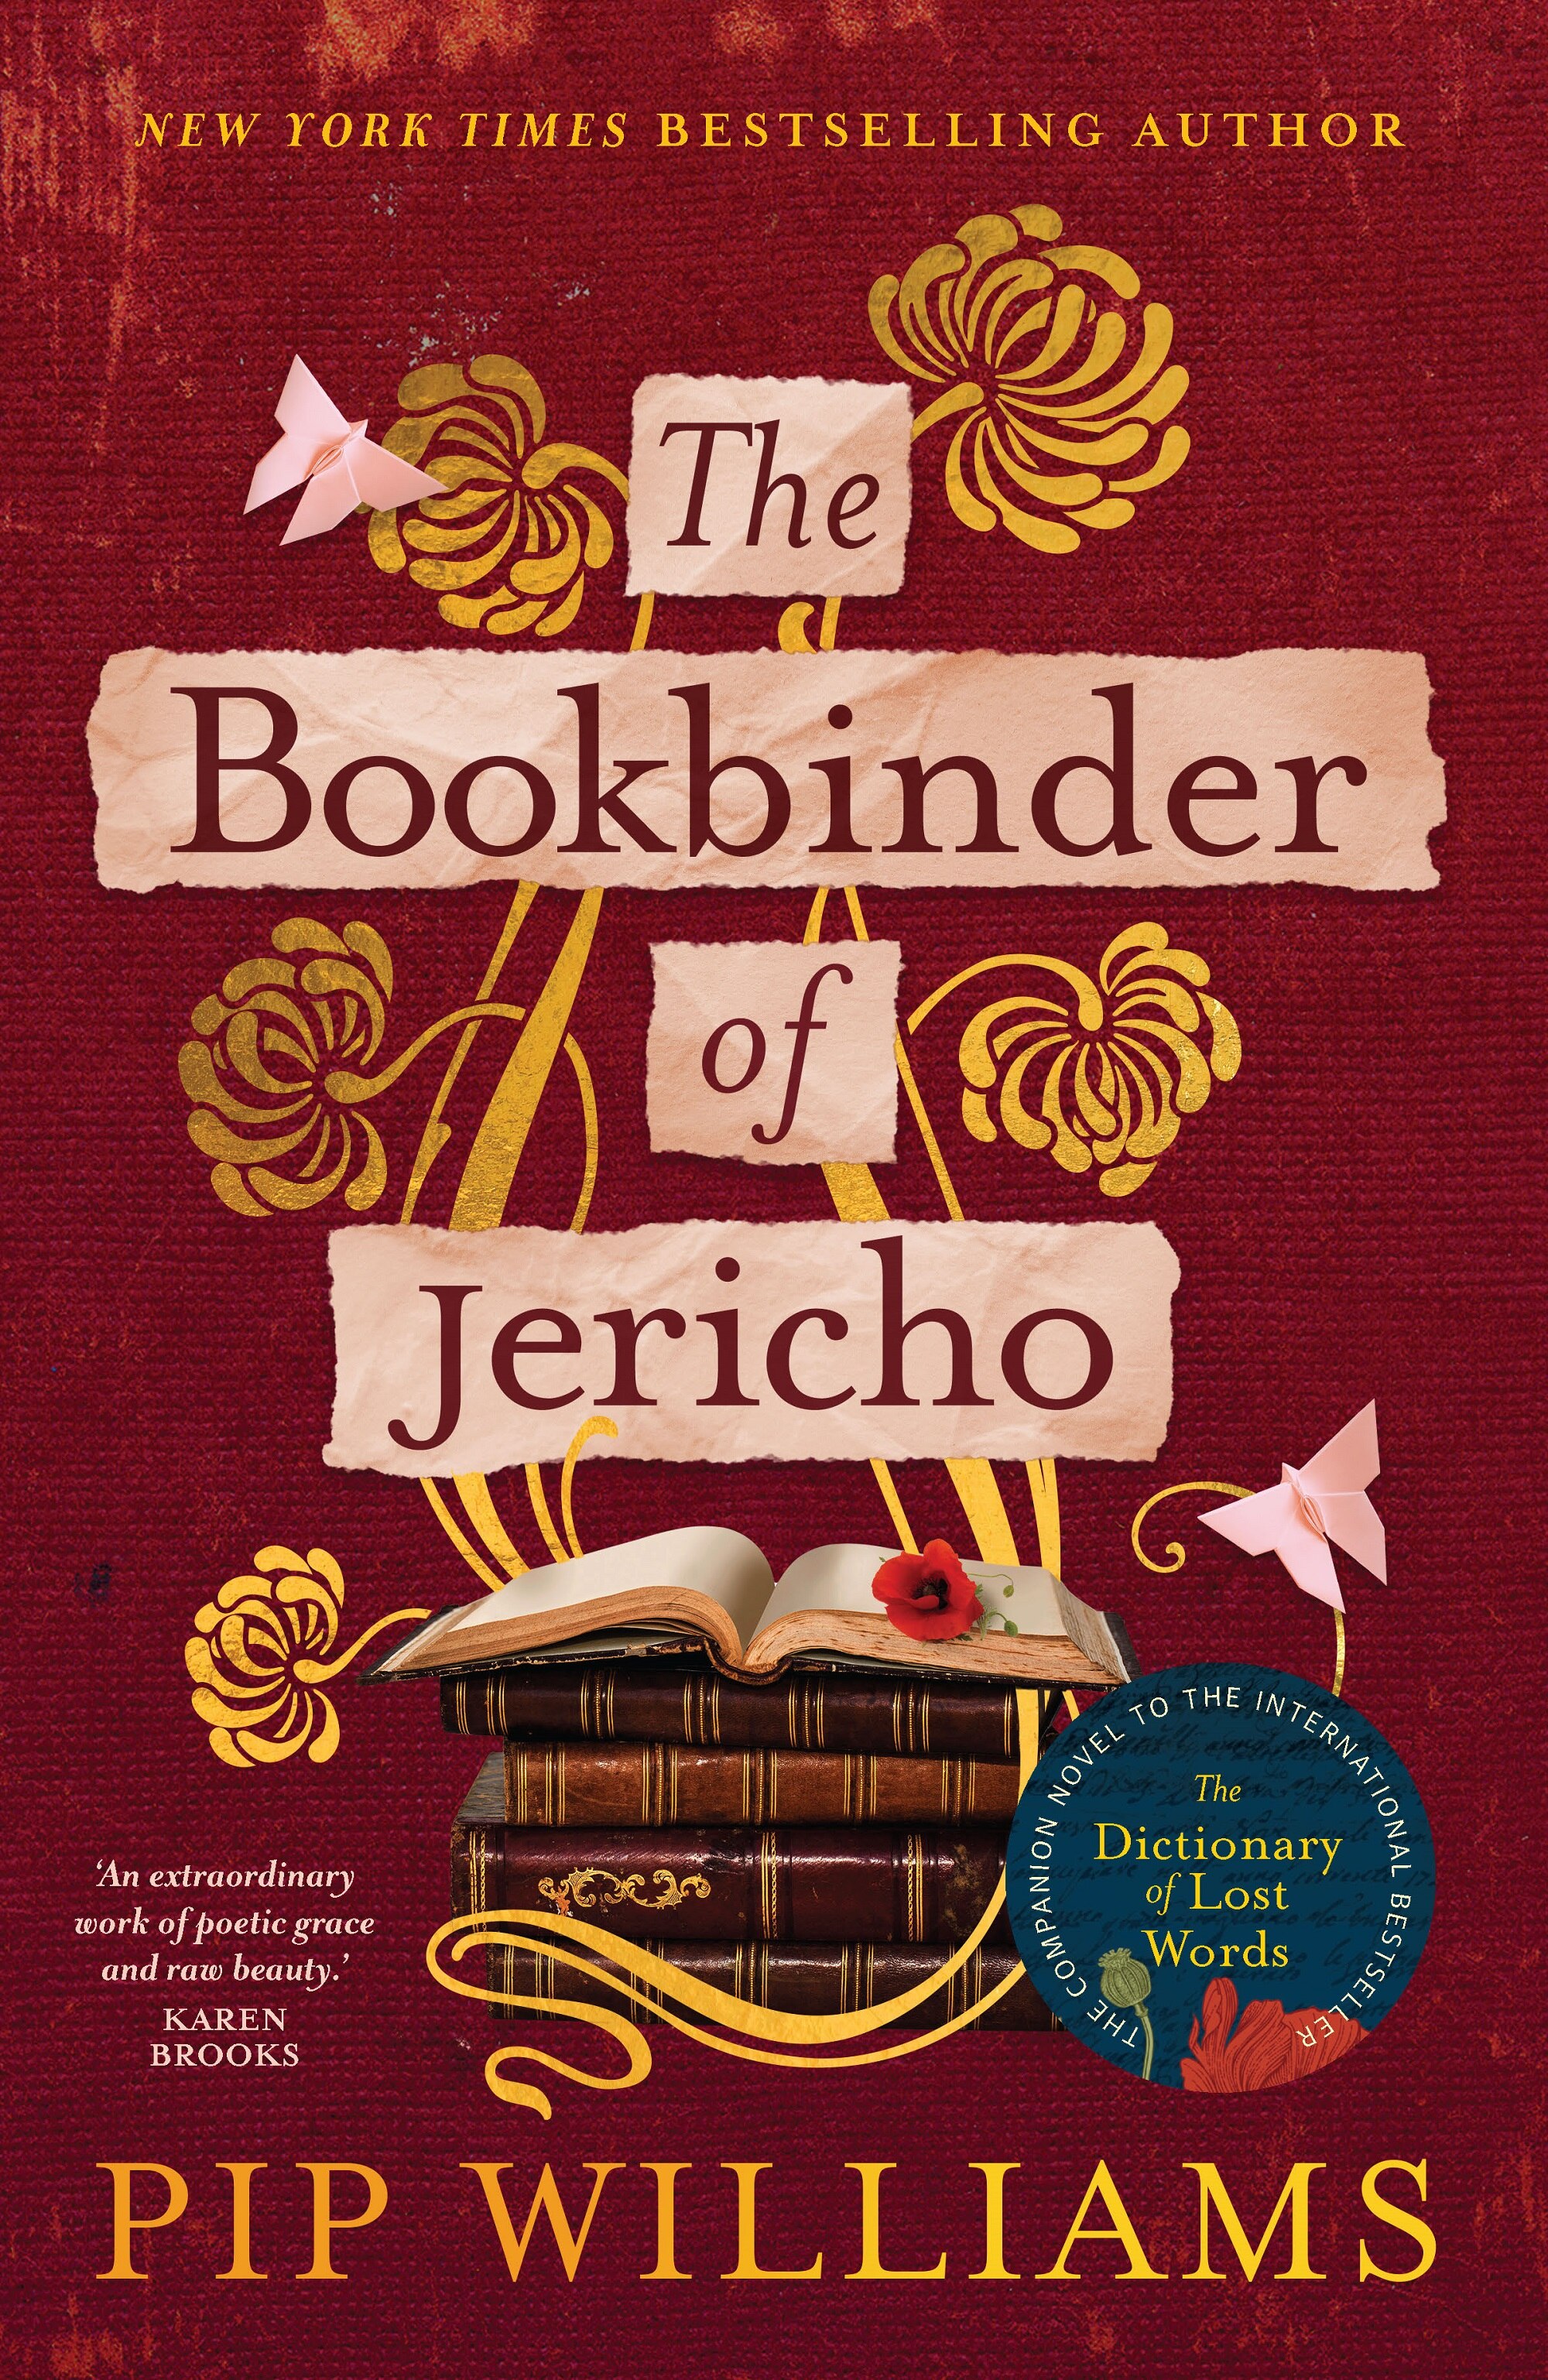 A book cover with text, an image of a stack of old-fashioned books, a decorative gold botanical pattern on a maroon background